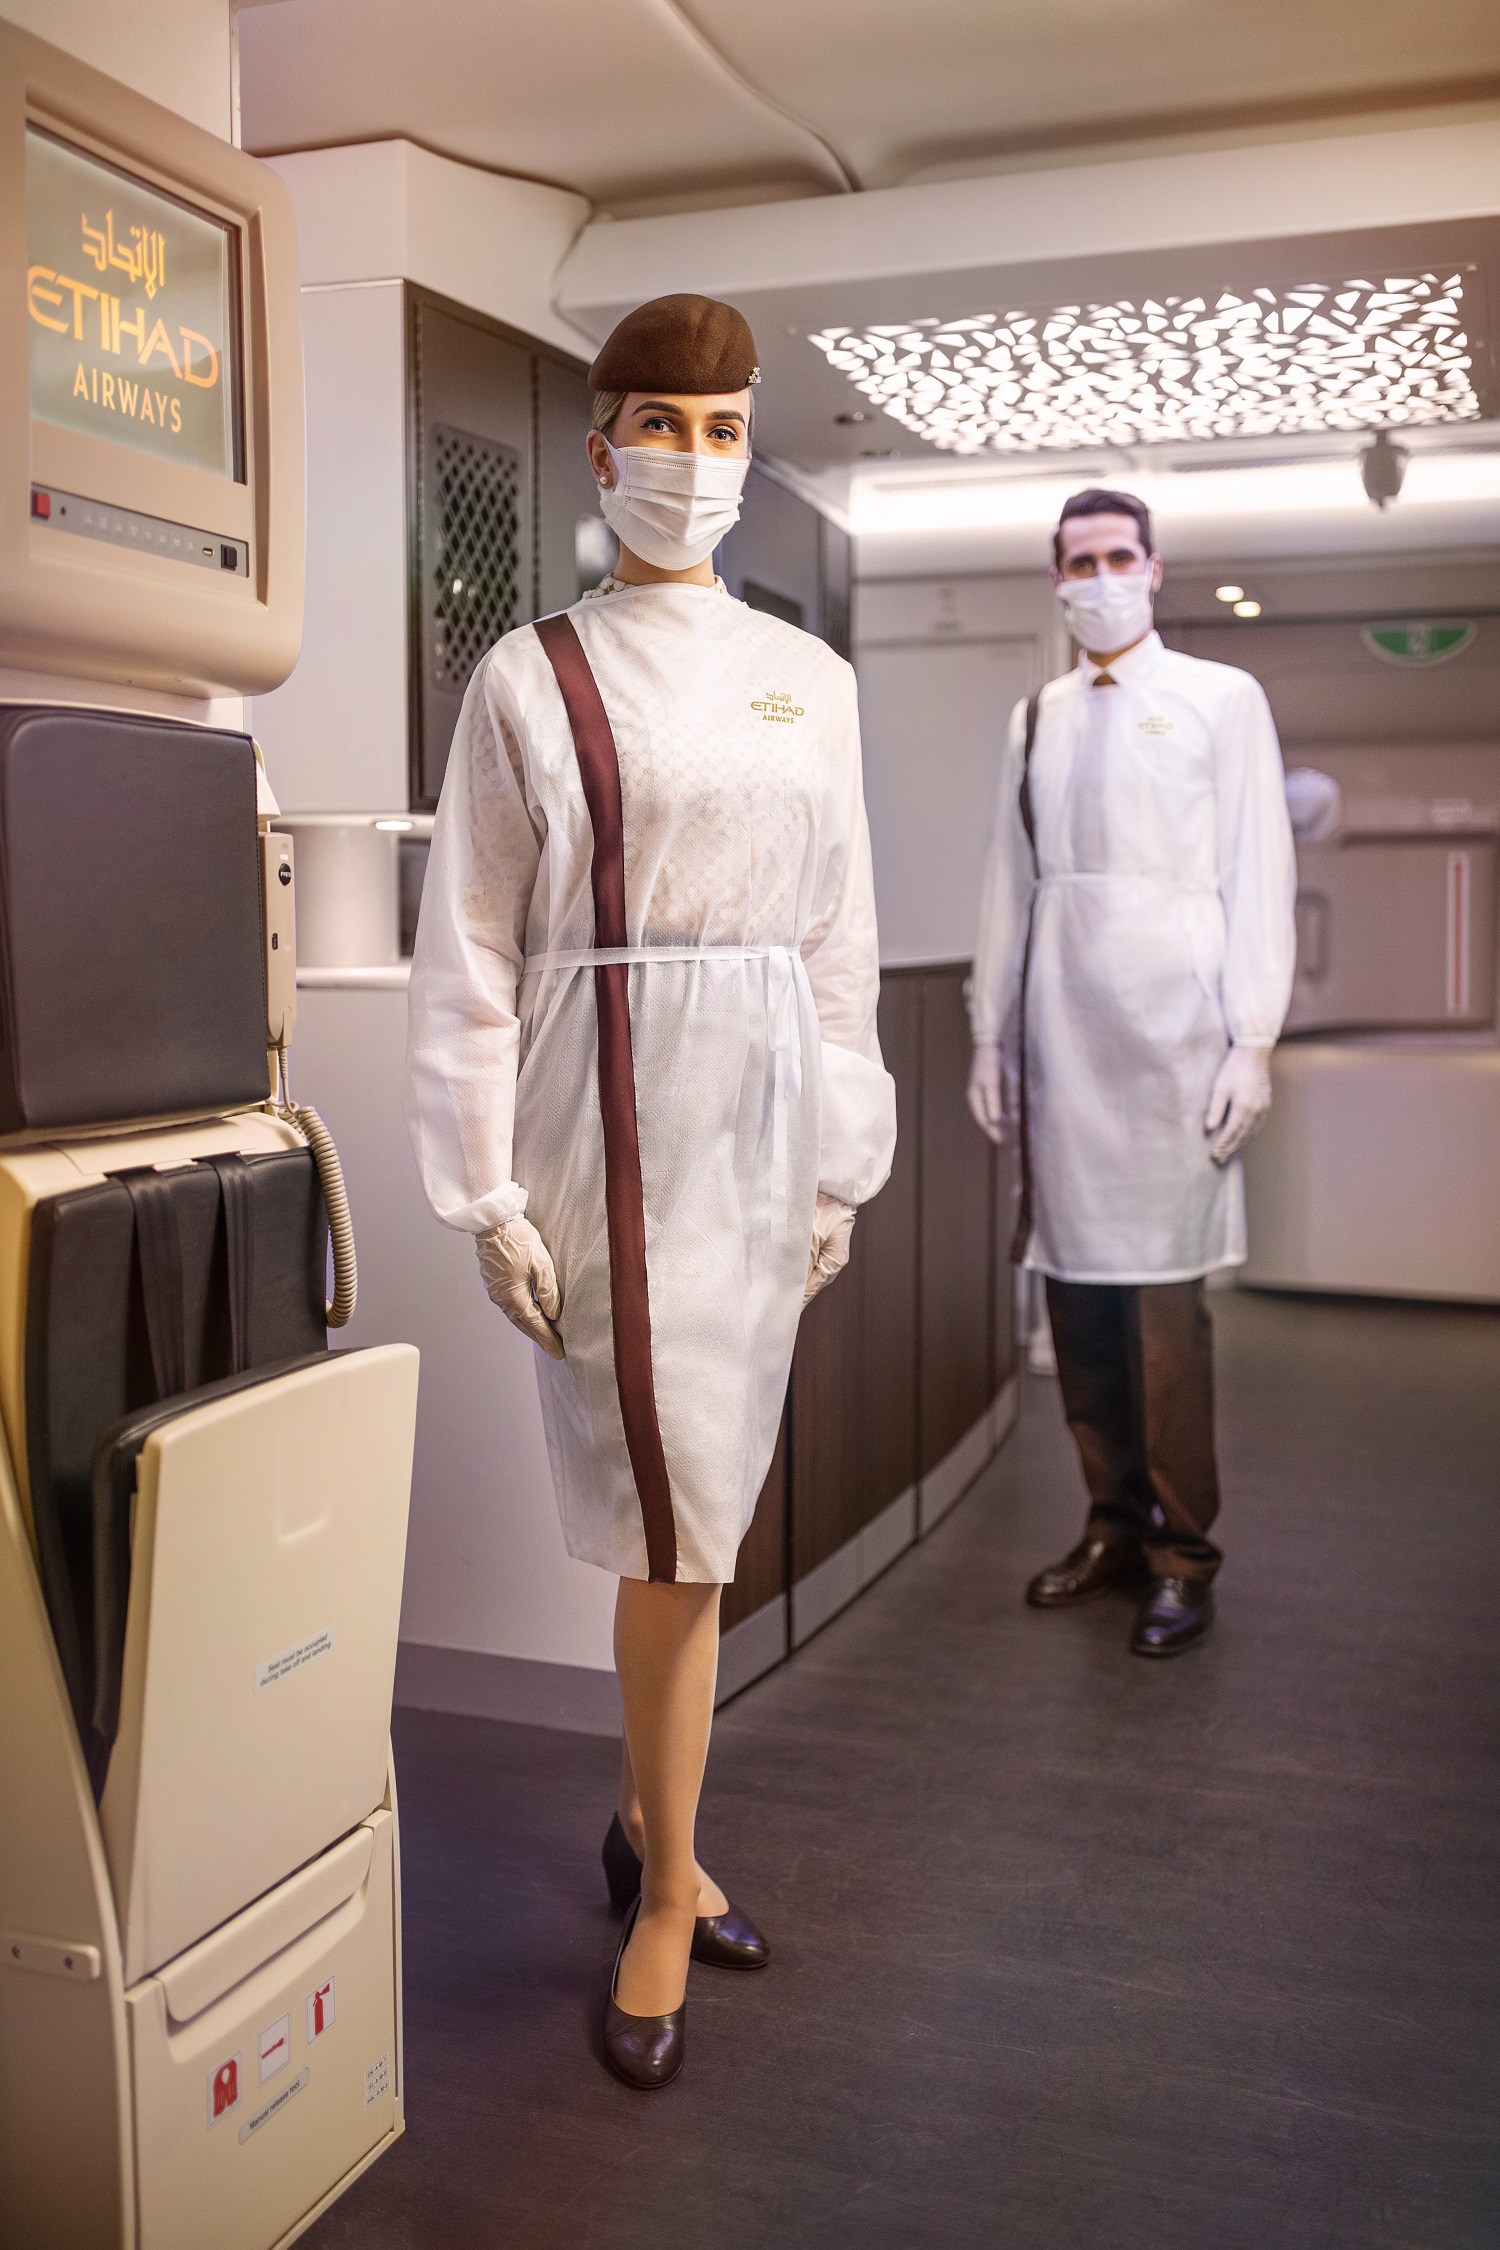 Etihad Airways Launches Health And Hygiene Programme Championed By New Wellness Ambassadors